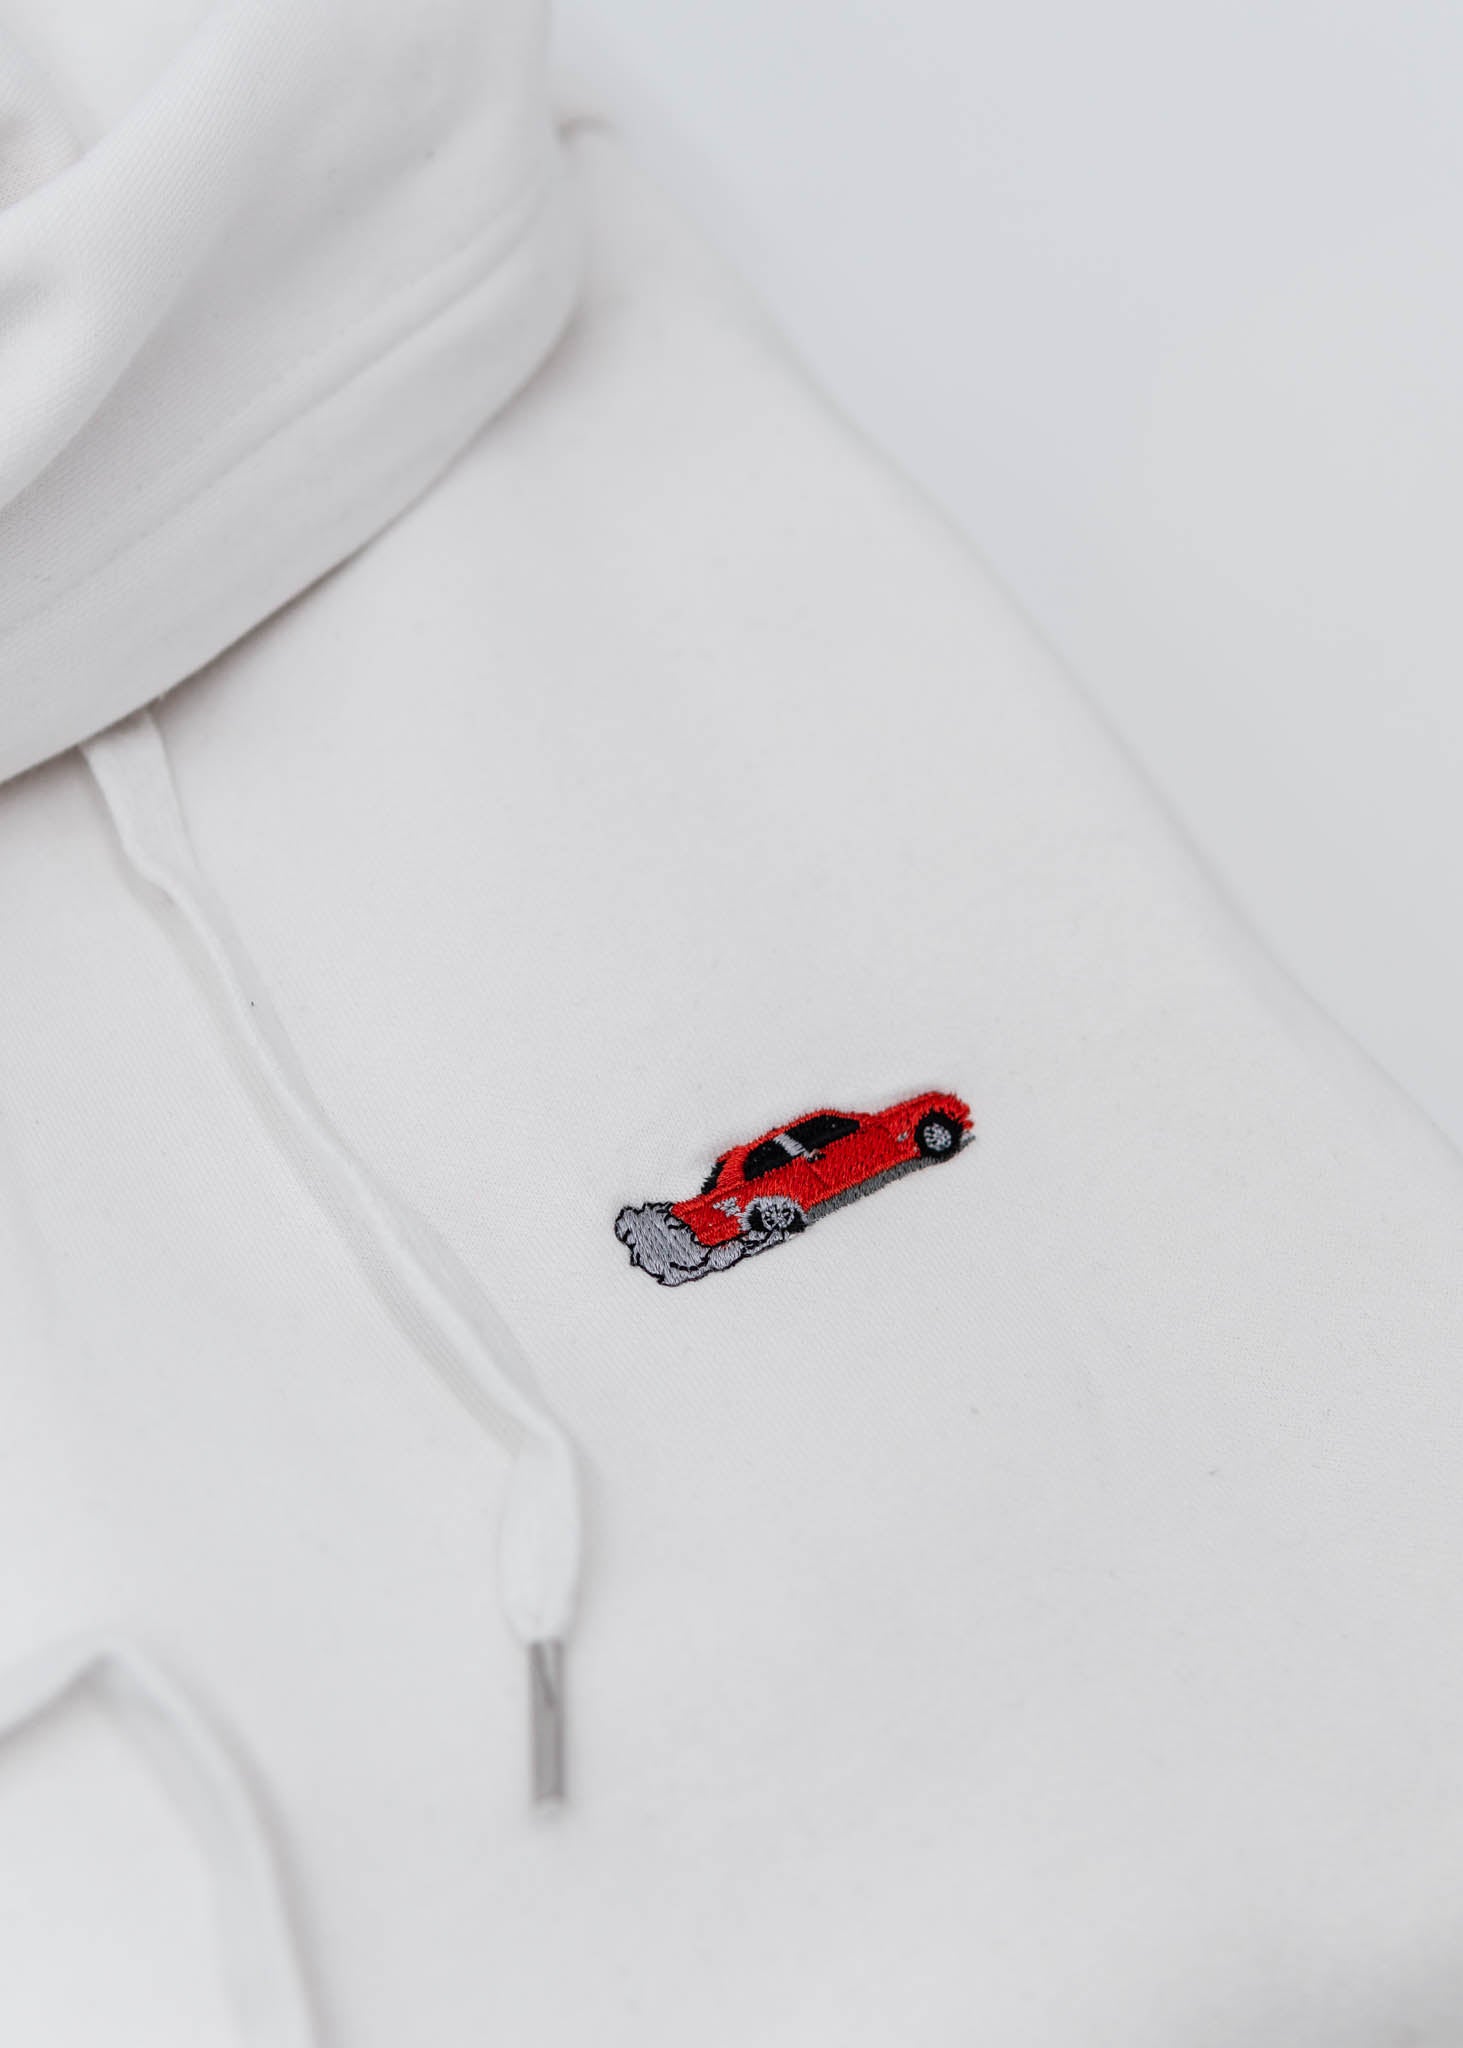 A white BMW/Bimmer unisex hoodie for men and women. Photo is a close up of the sweater with an embroidered Red BMW E30 M3 doing a burnout. Fabric composition is cotton, polyester, and rayon. The material is very soft, stretchy, and non-transparent. The style of this hoodie is long sleeve, crewneck with a hood, hooded, with embroidery on the left chest.